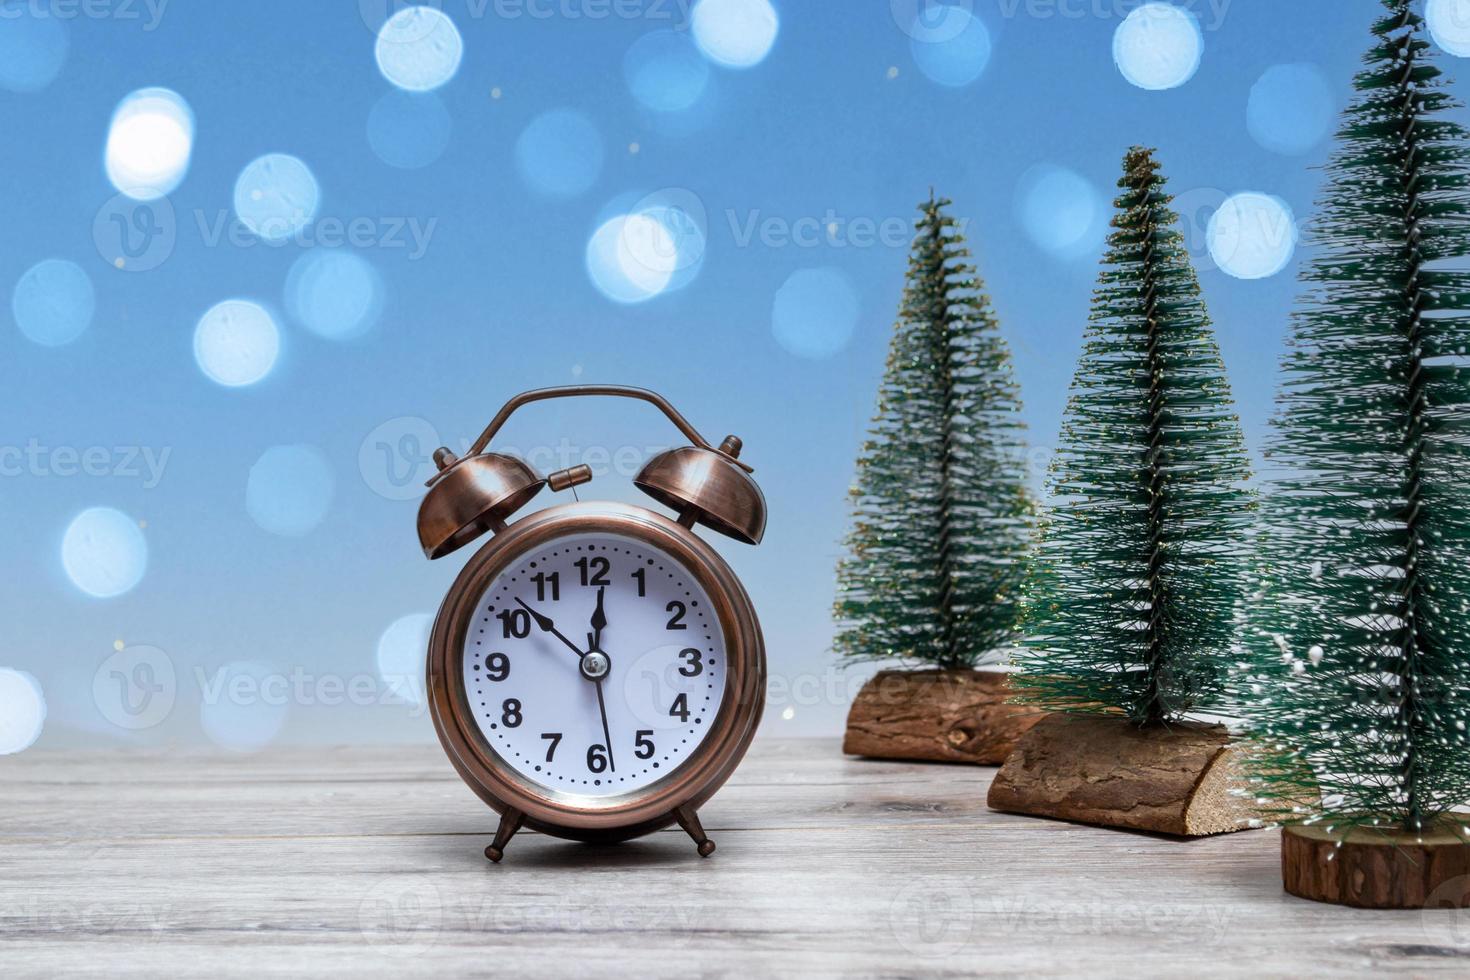 Christmas background with small Christmas trees and vintage alarm clock on a wooden background with lights. Close photo